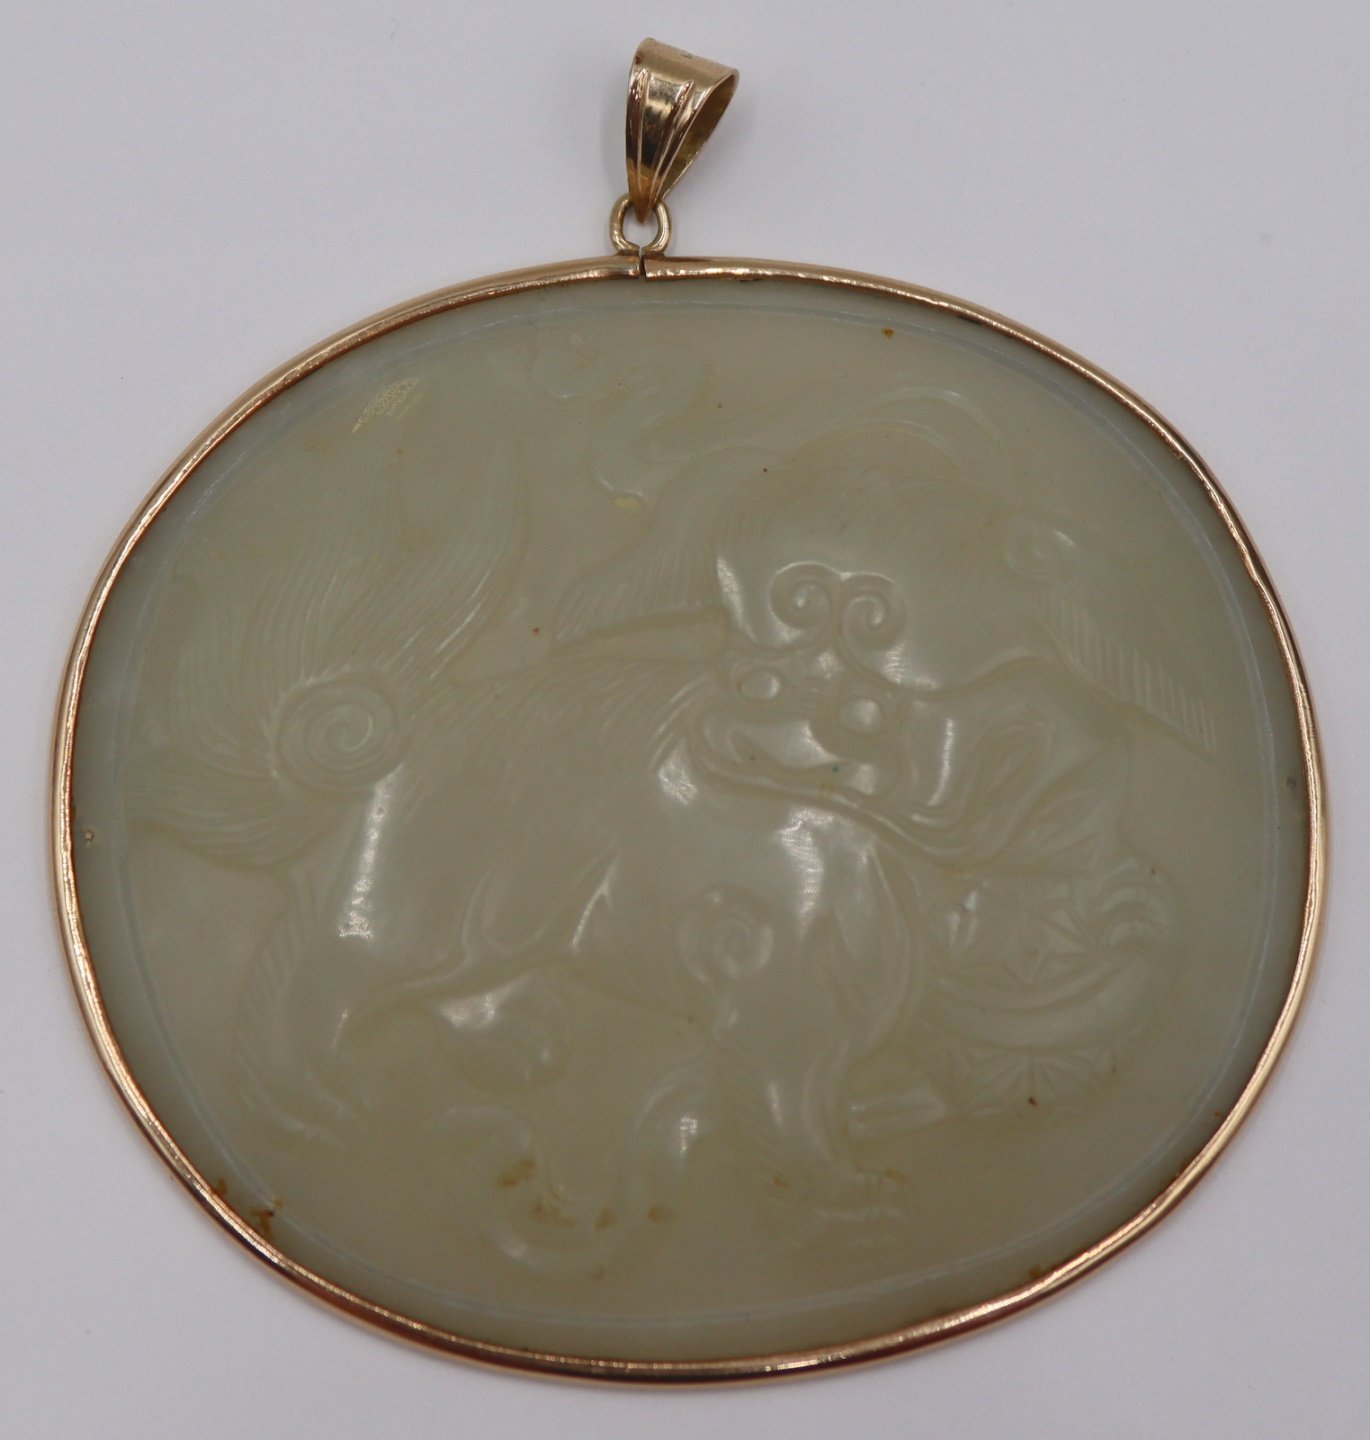 JEWELRY. 14KT GOLD MOUNTED JADE